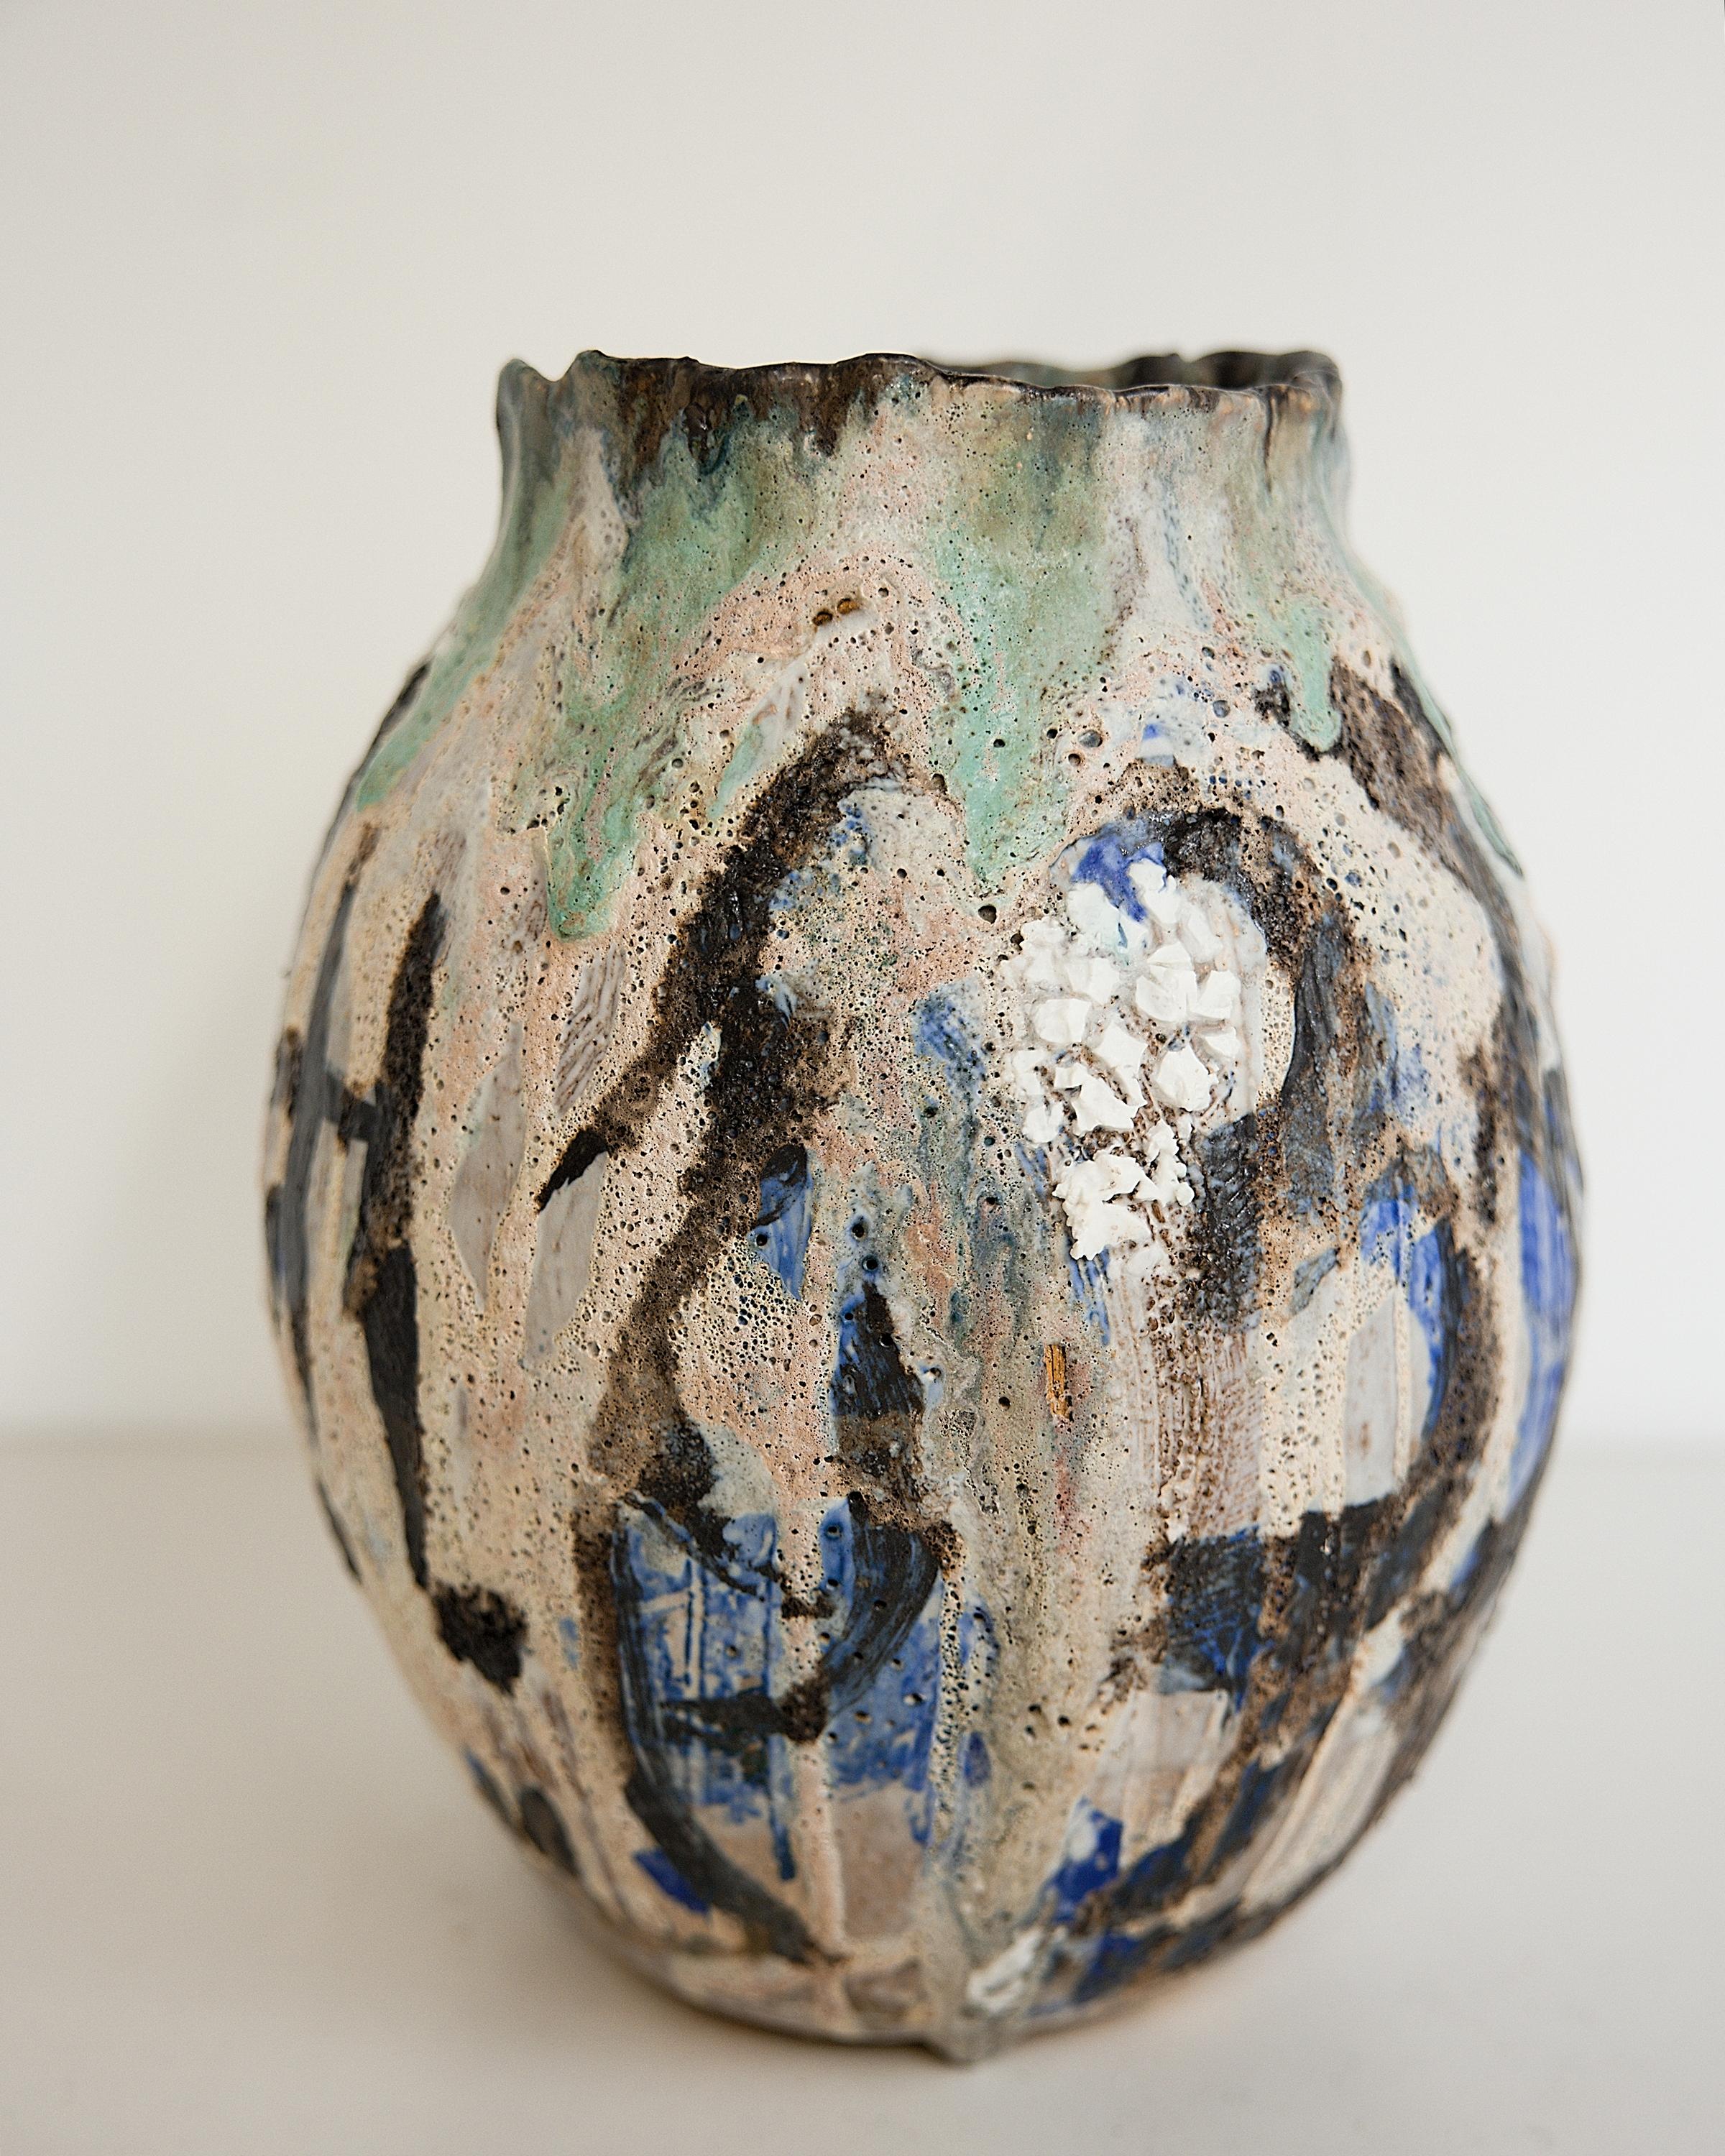 Art Series
Flowing waterfall.. water color series 

Large  Oval Moon Vase approx 14.5 inches tall x 13.6 inches wide
Heavy: 26 lbs
a mix of traditional with organic modern this Large Moon jar  shape with texture and many layers of custom glazes.